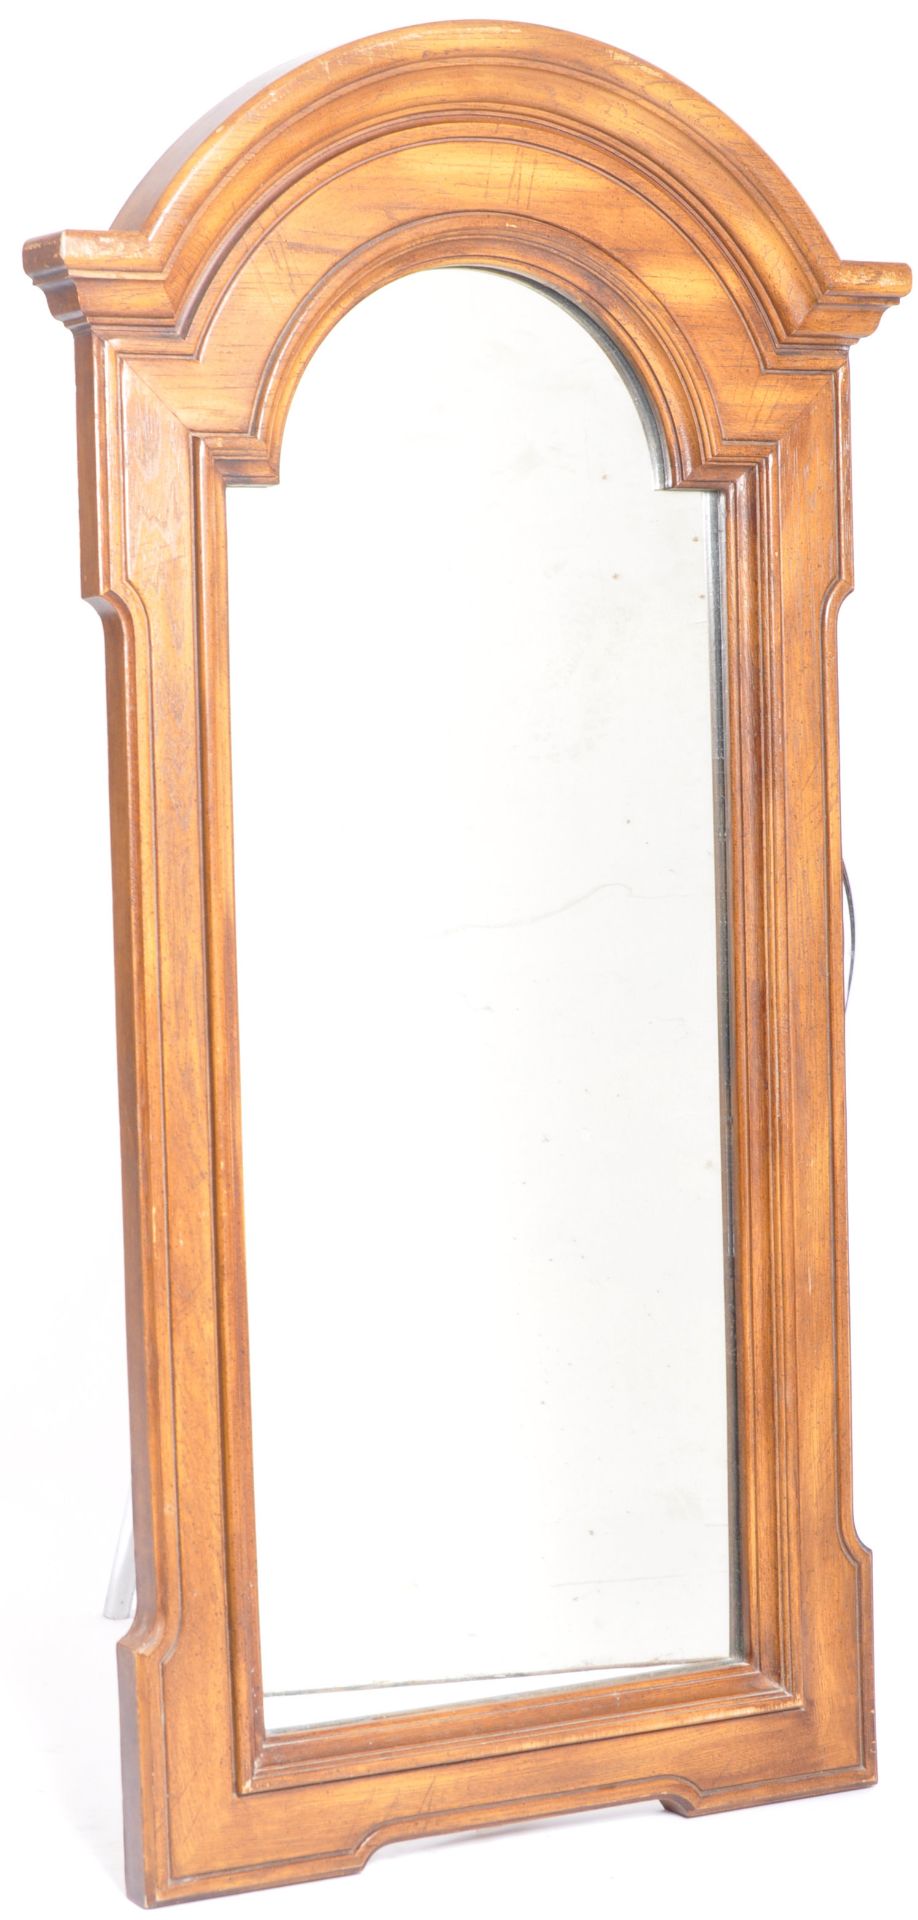 VINTAGE 20TH CENTURY HANGING ANTIQUE REVIVAL WALL MIRROR